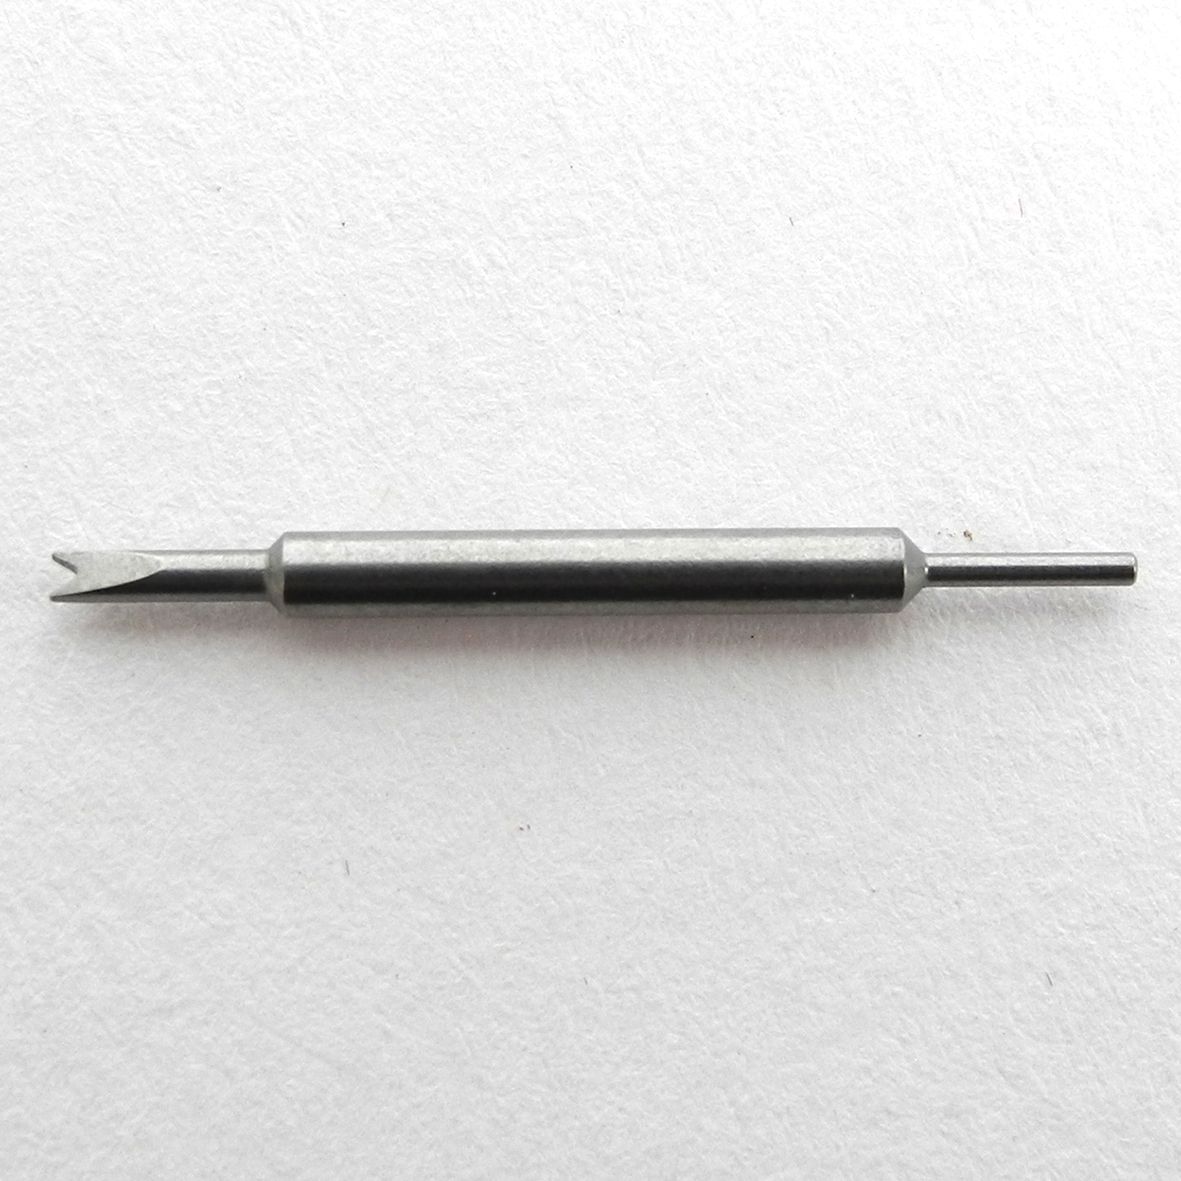 Genuine Bergeon 6111 Spring Bars Tool-Removes Watch Pins -LUX